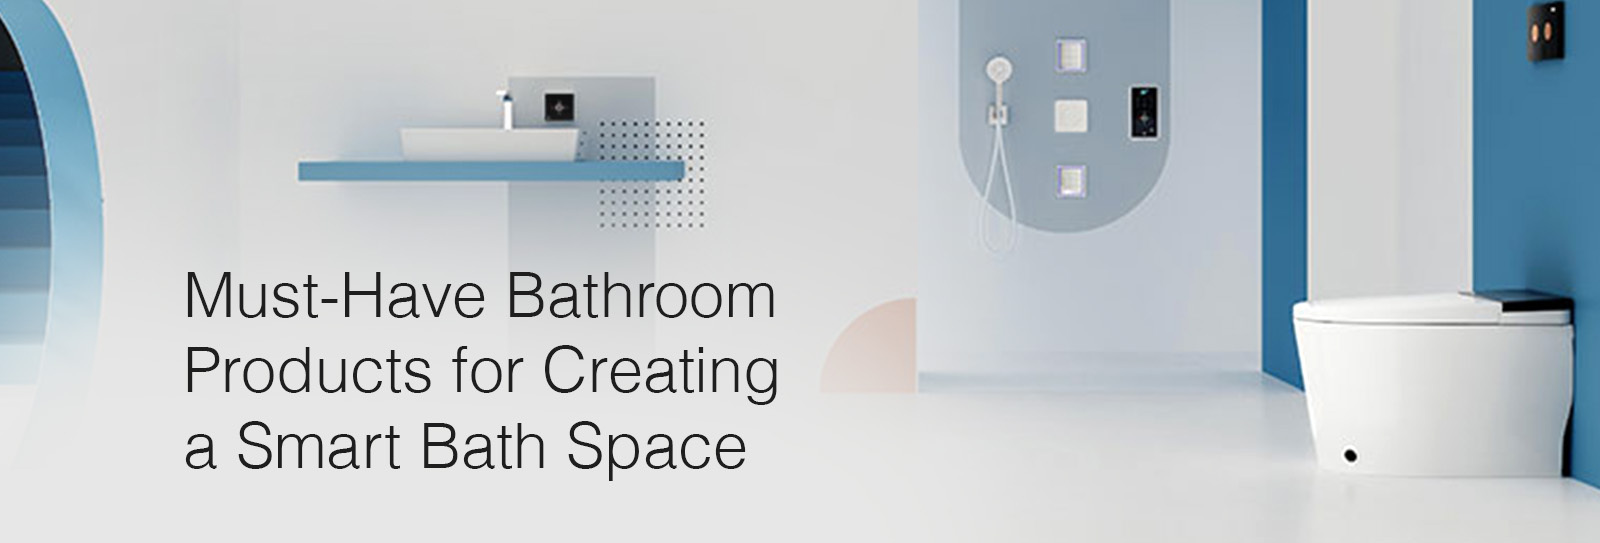 Must-Have Bathroom Products for Creating a Smart Bath Space